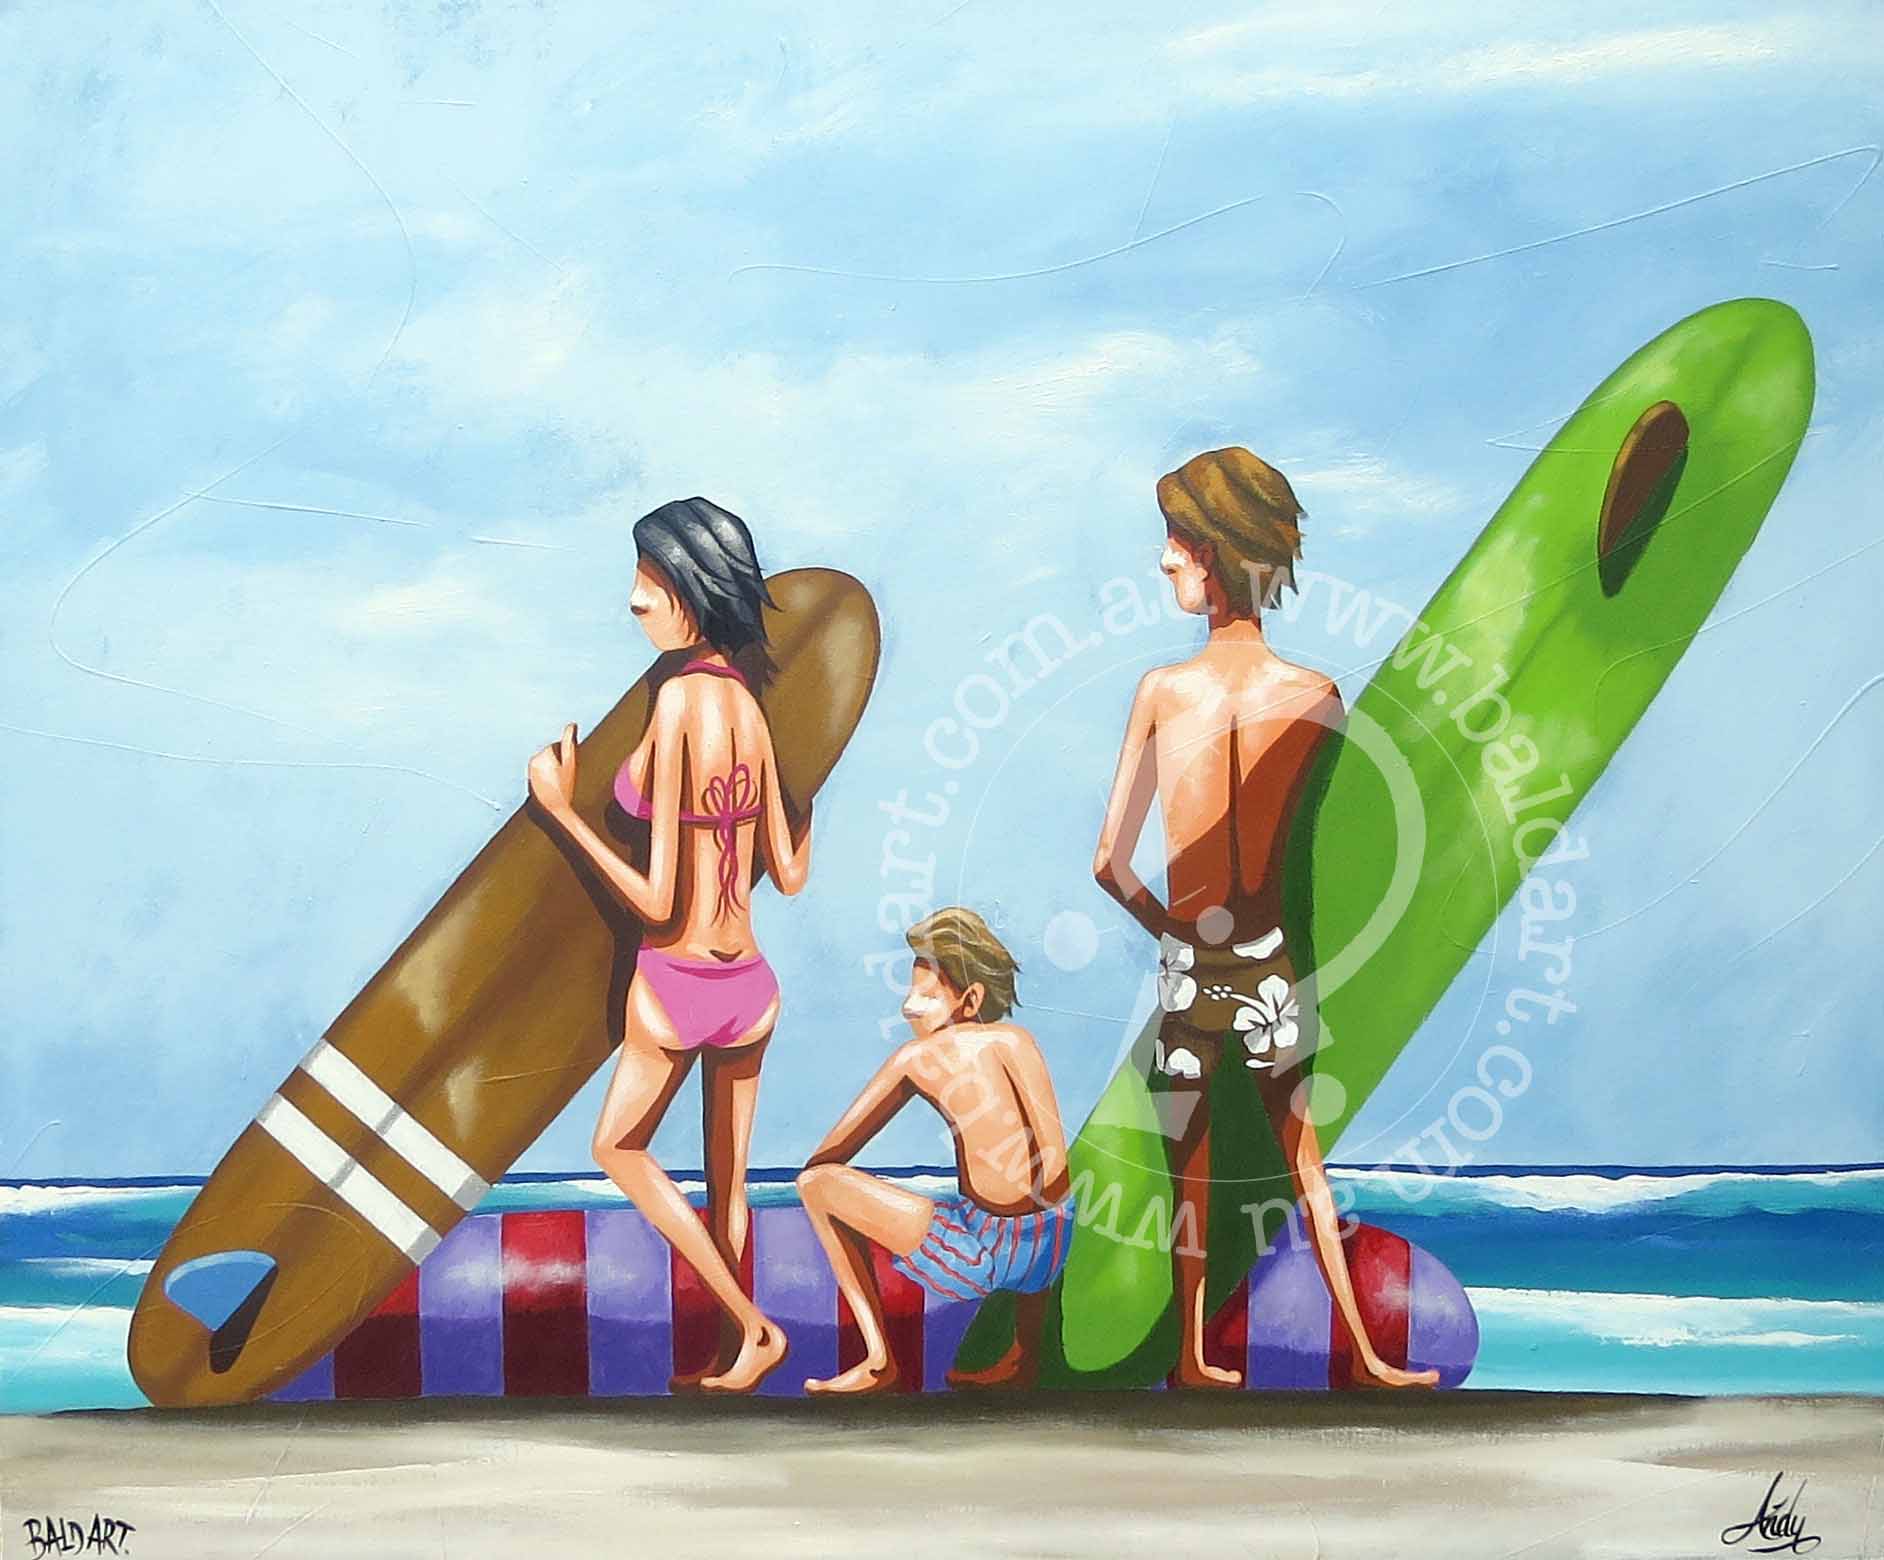 andy baker Surfers Paradise Painting Beach print art australia abstract